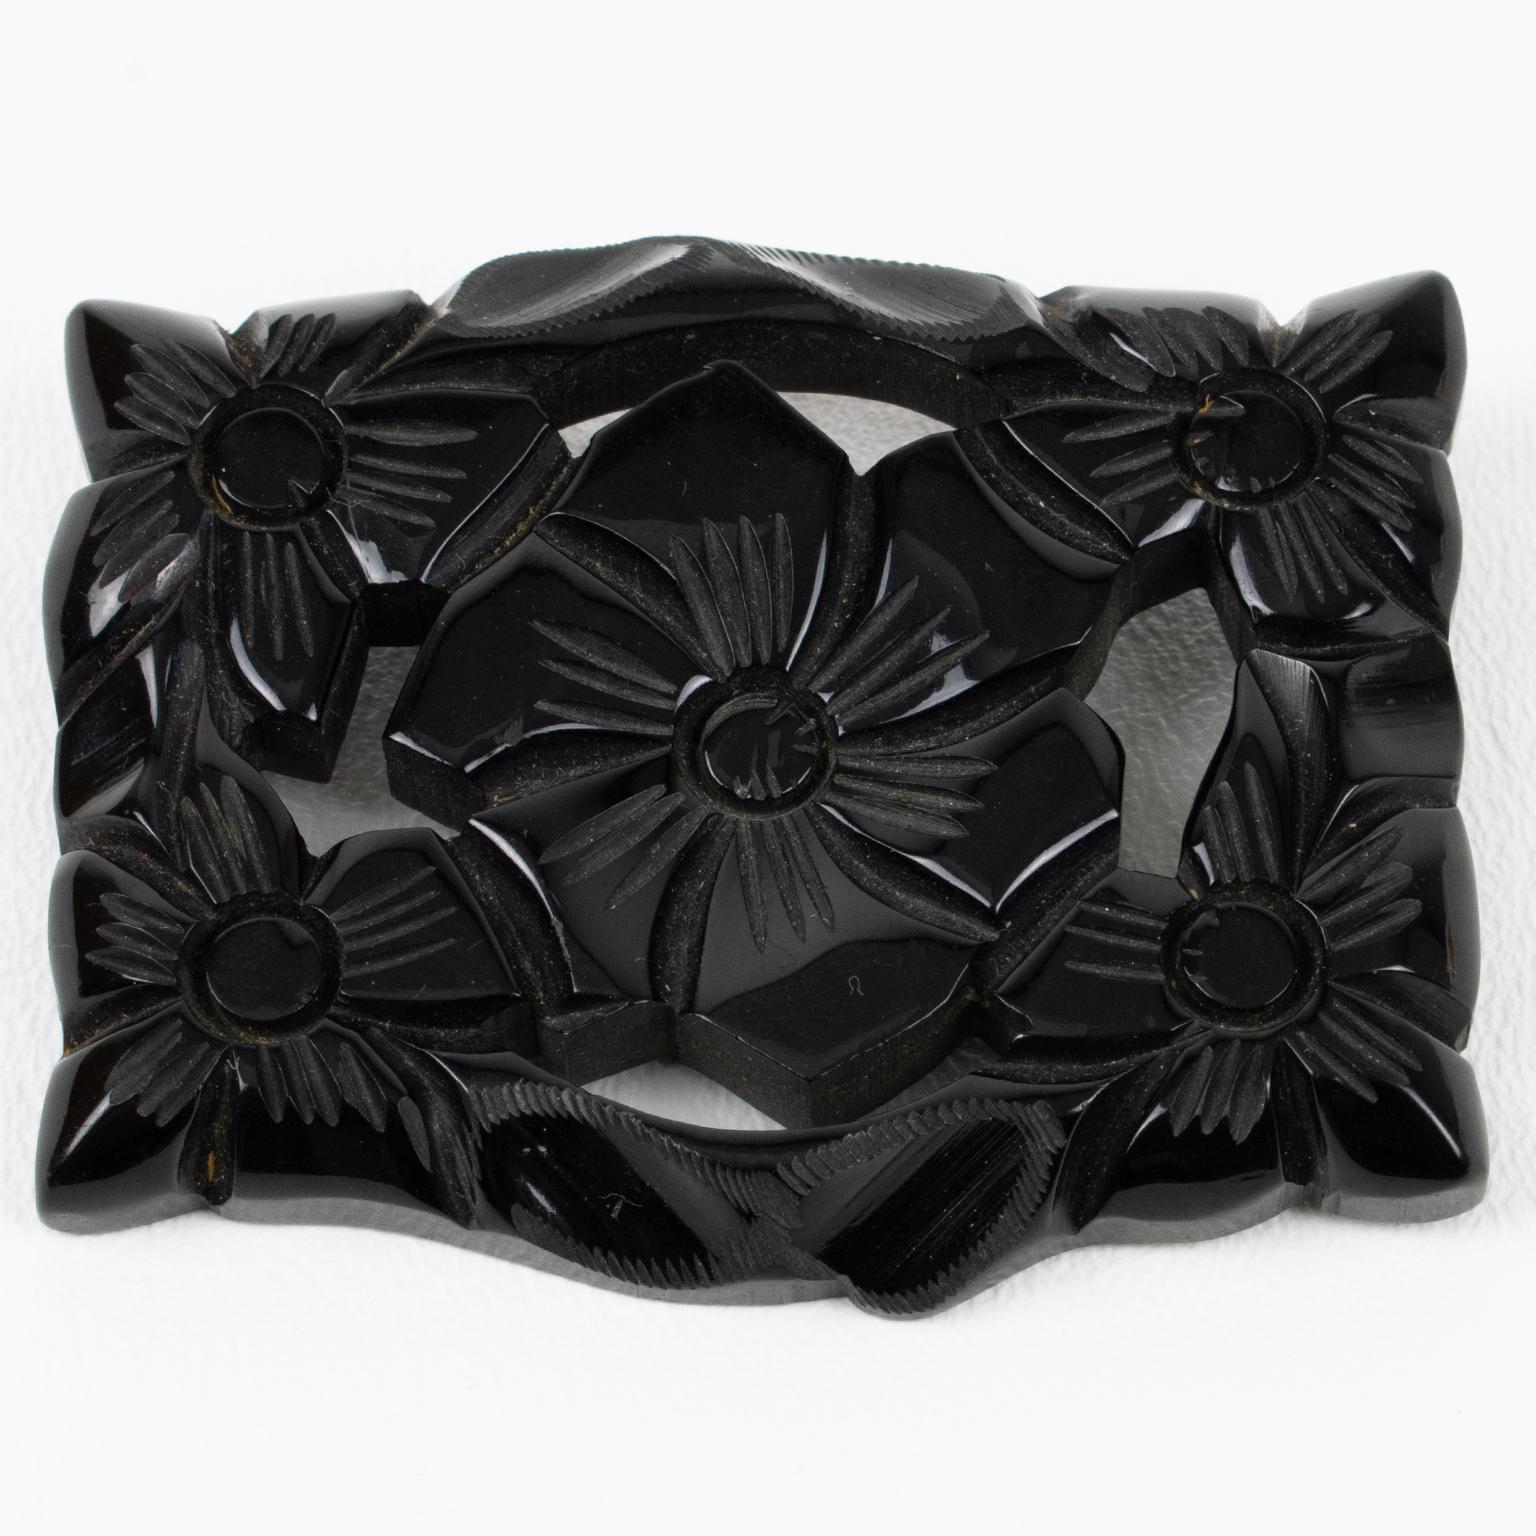 Gorgeous carved Bakelite pin brooch. Oversized rectangular and dimensional shape with deeply carved and see thru floral design. True licorice black color. Regular closing clasp. There is no visible maker's mark. 
Measurements: 2.63 in. wide (6.7 cm)